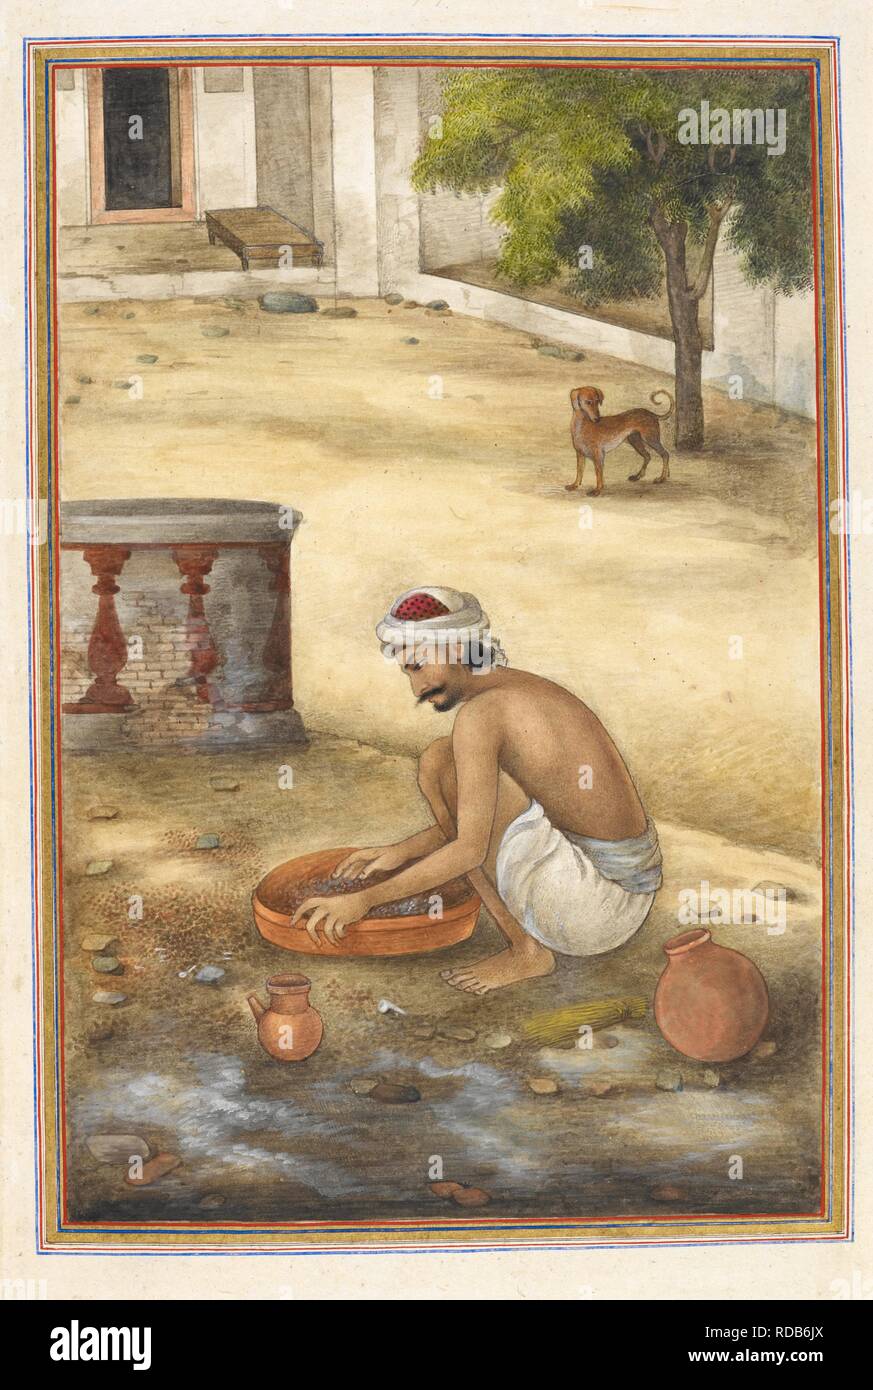 Sweepings-sifter. A man searching sweepings for gold or silver. Tashrih al-aqvam, an account of origins and occupations of some of the sects, castes and tribes of India. Written at Hansi Cantonment, Hissar District, eighty-five miles north-west of Delhi for Colonel James Skinner. 1825. Source: Add. 27255, f.314v. Language: Persian. Author: ANON. Stock Photo